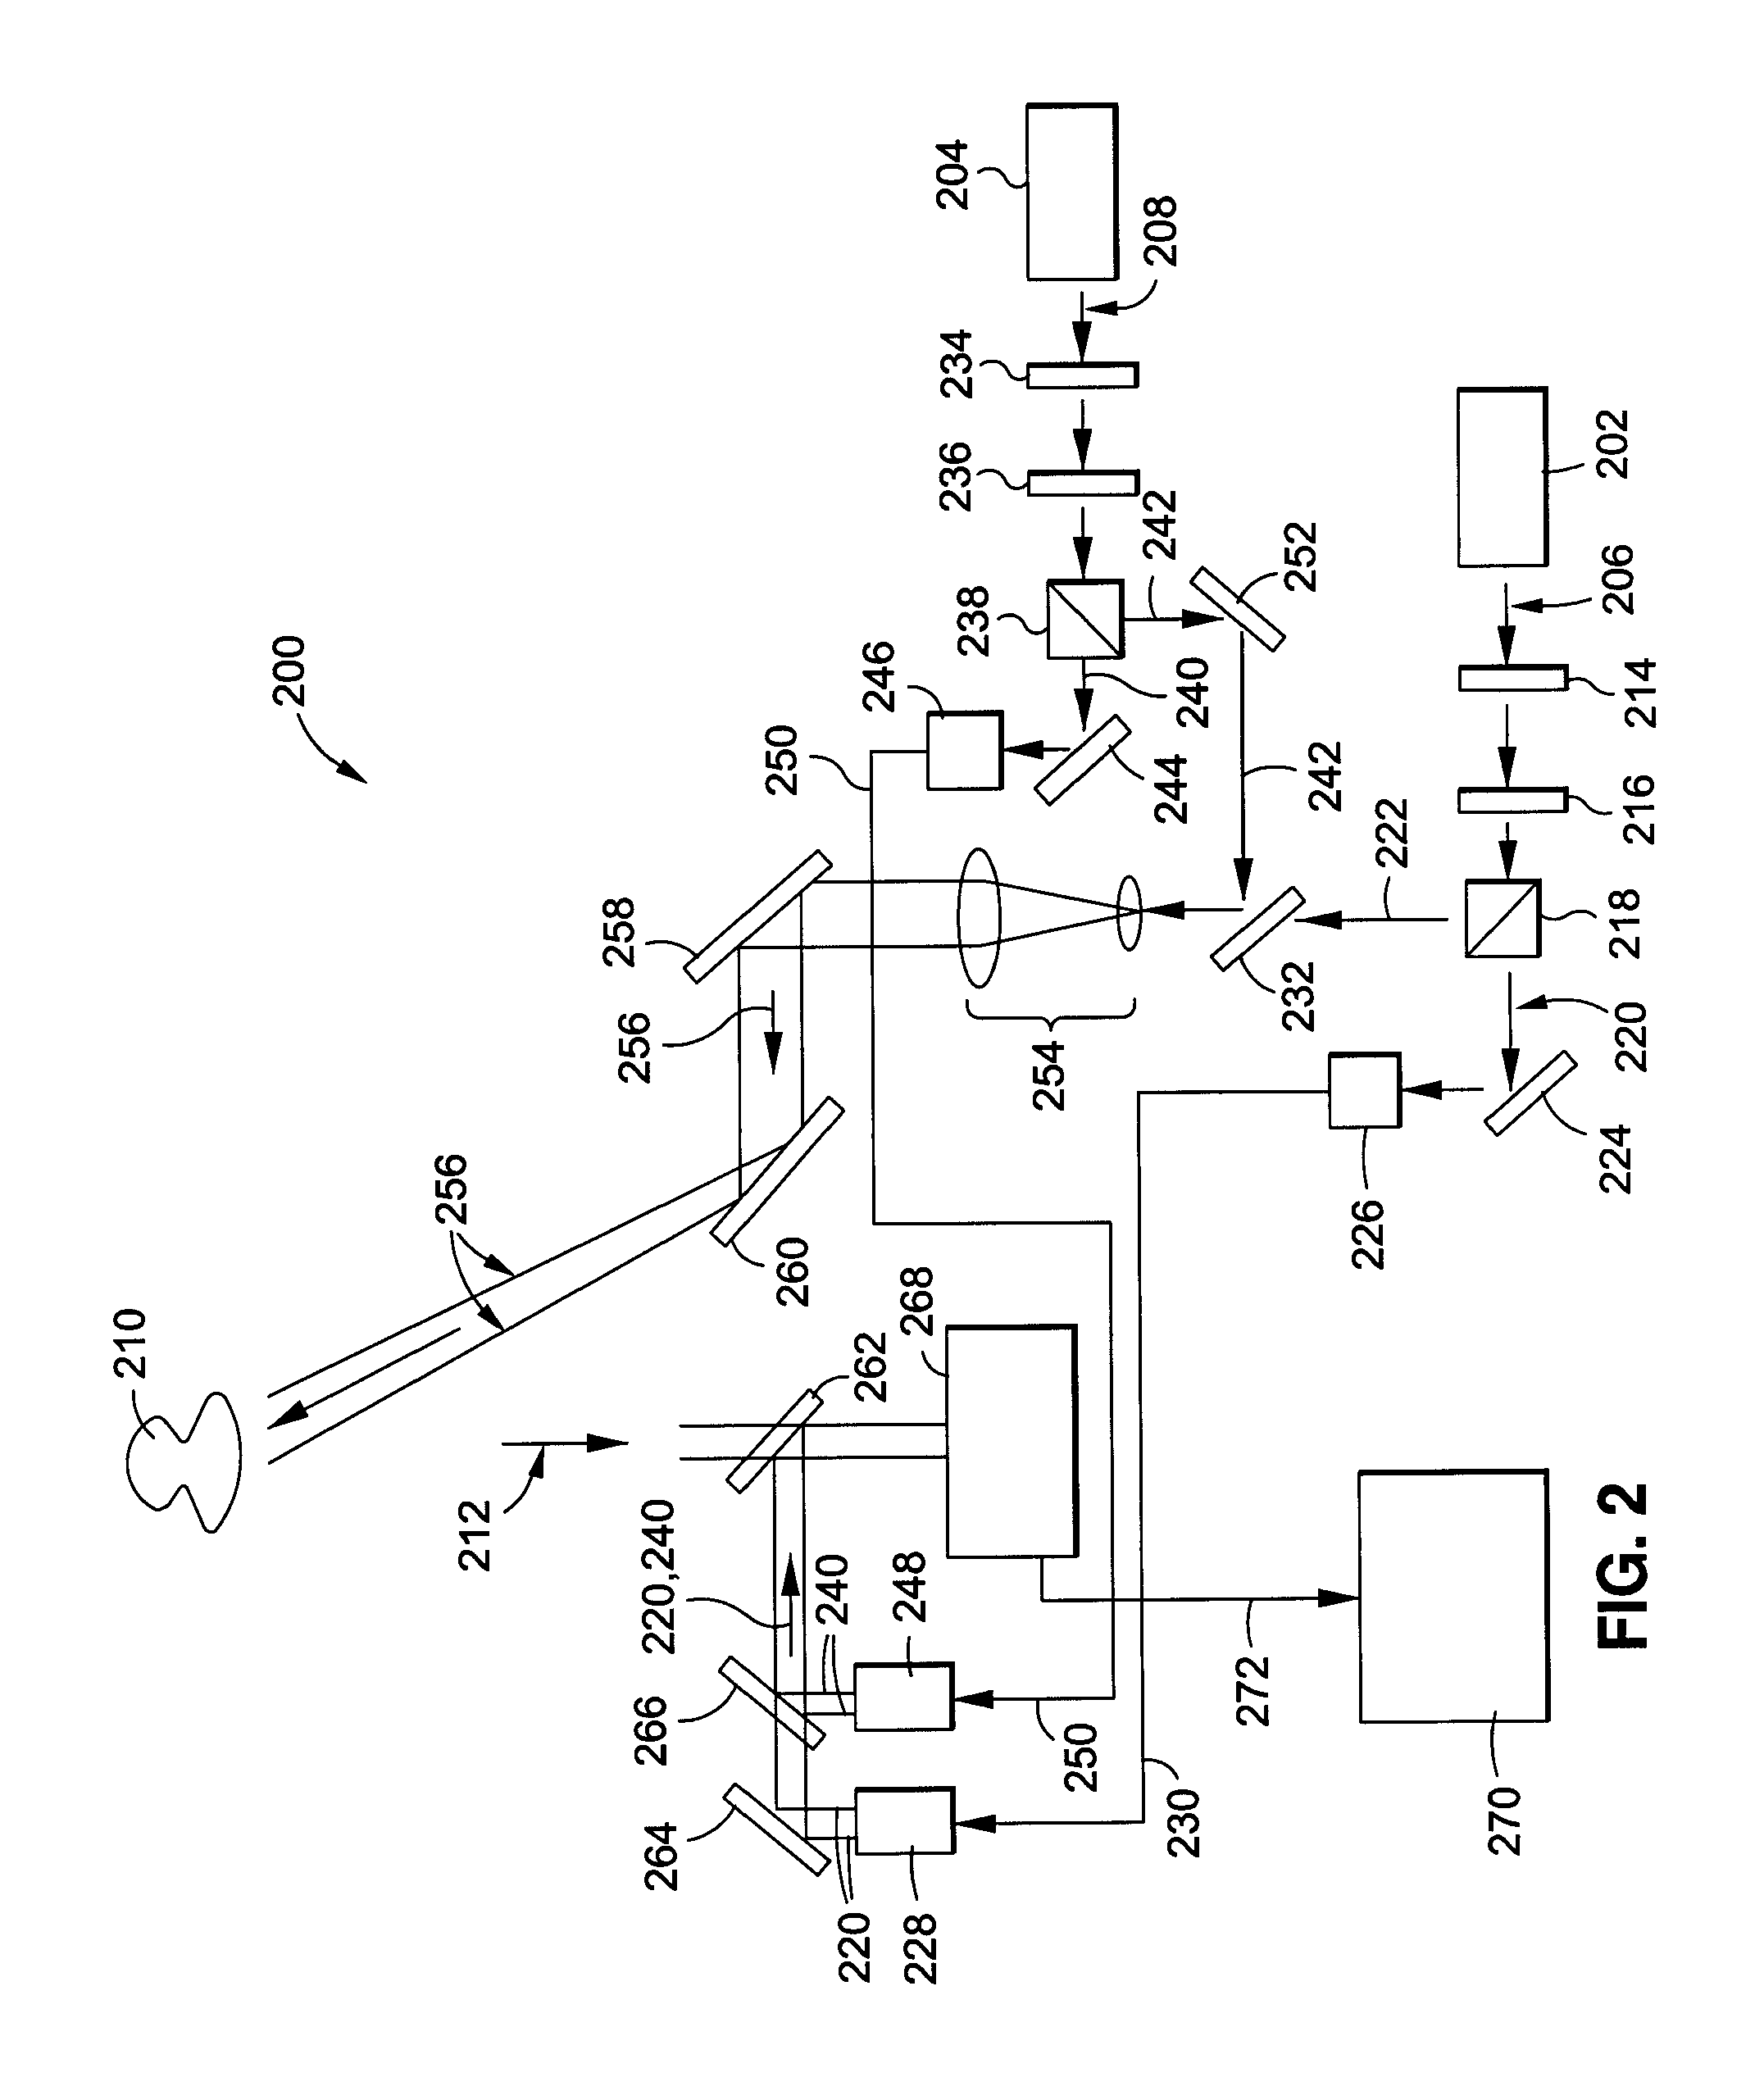 Systems and methods for multi-function coherent imaging